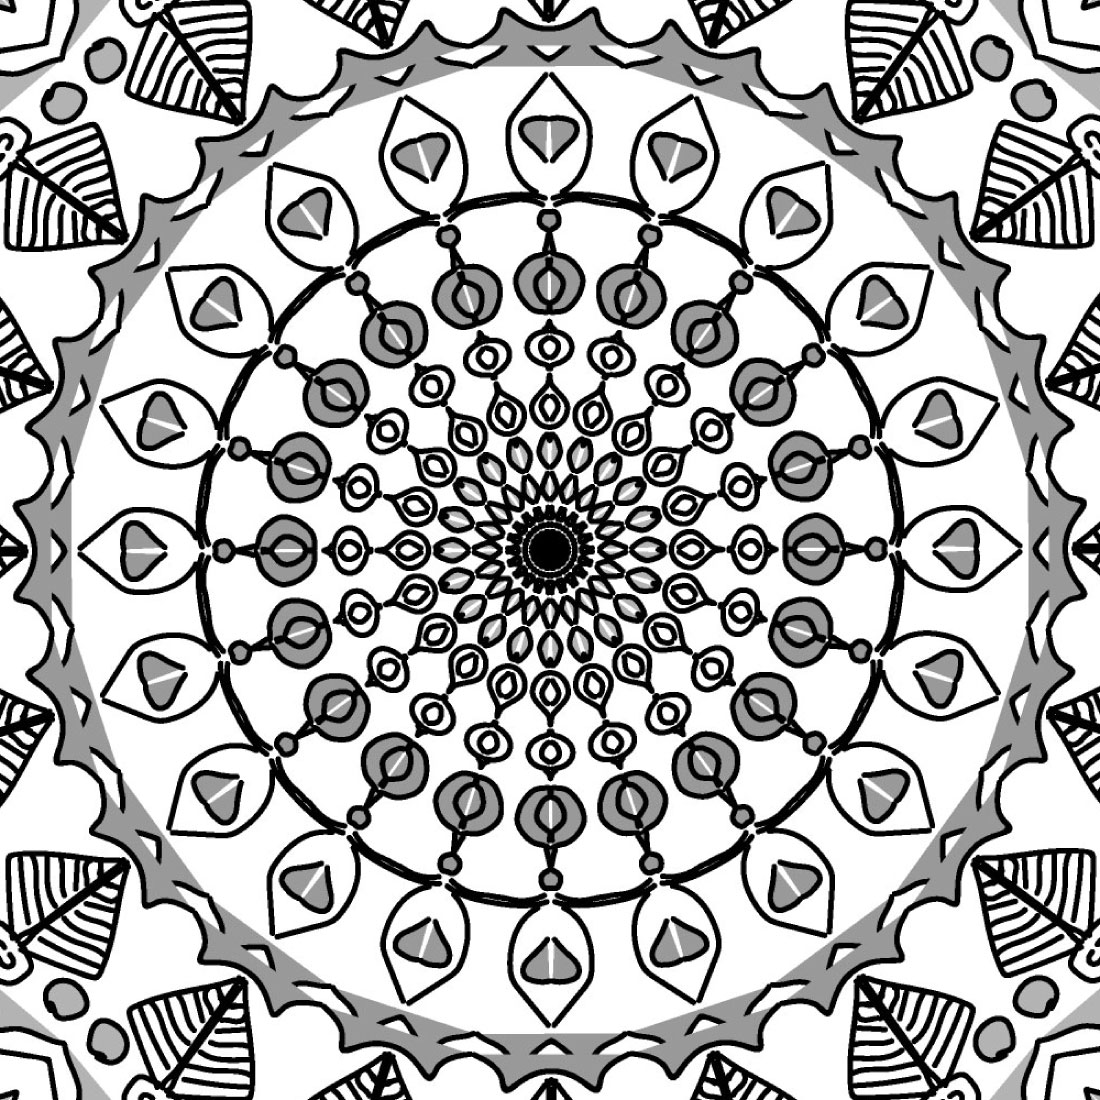 Mandala art with black and gray cover image.